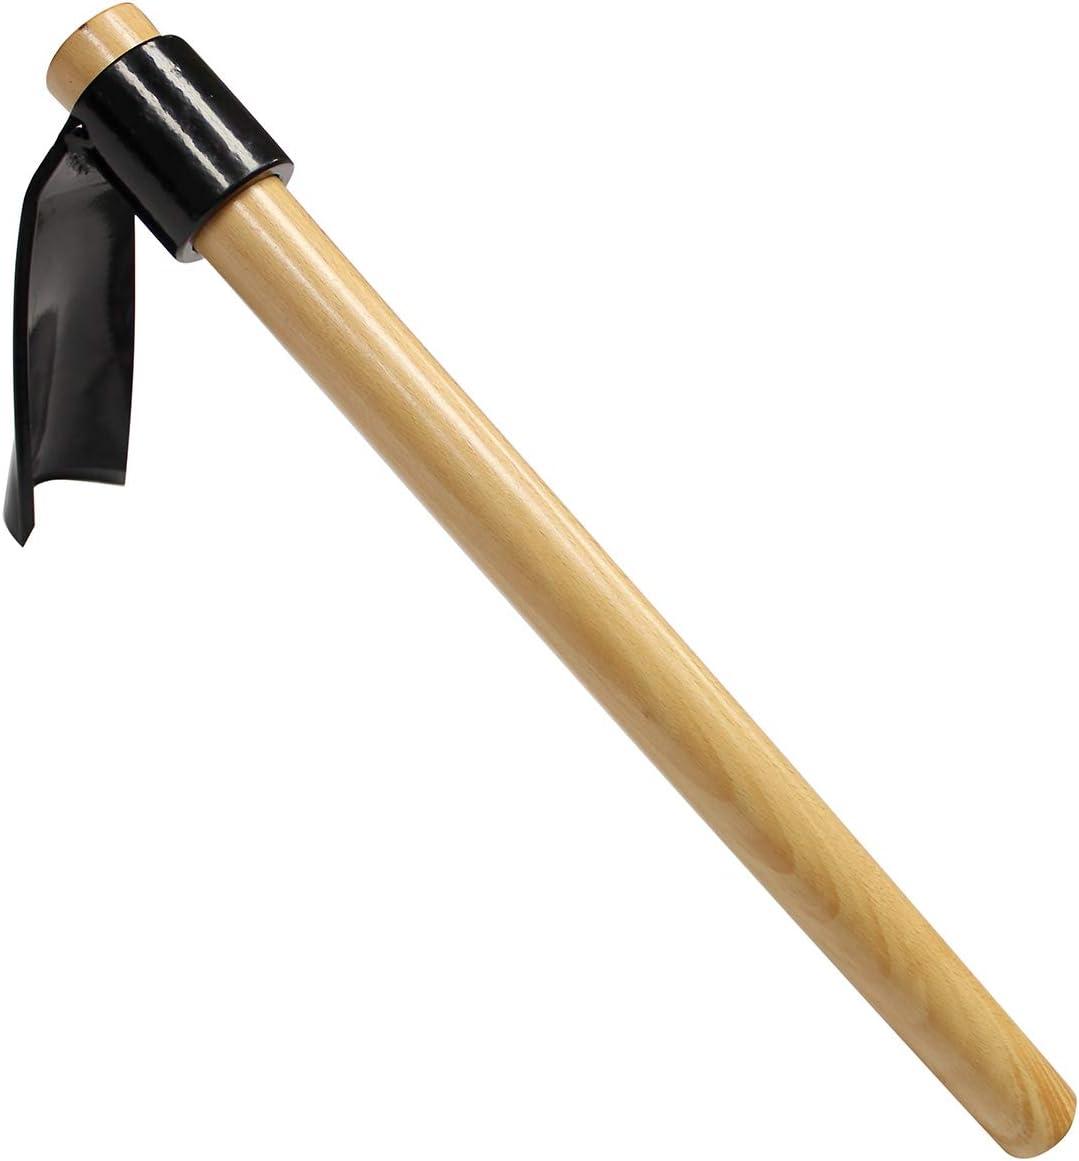 Felled Woodworking Adze Axe - Curved Hand Adze Log Carving Tool, 18 in